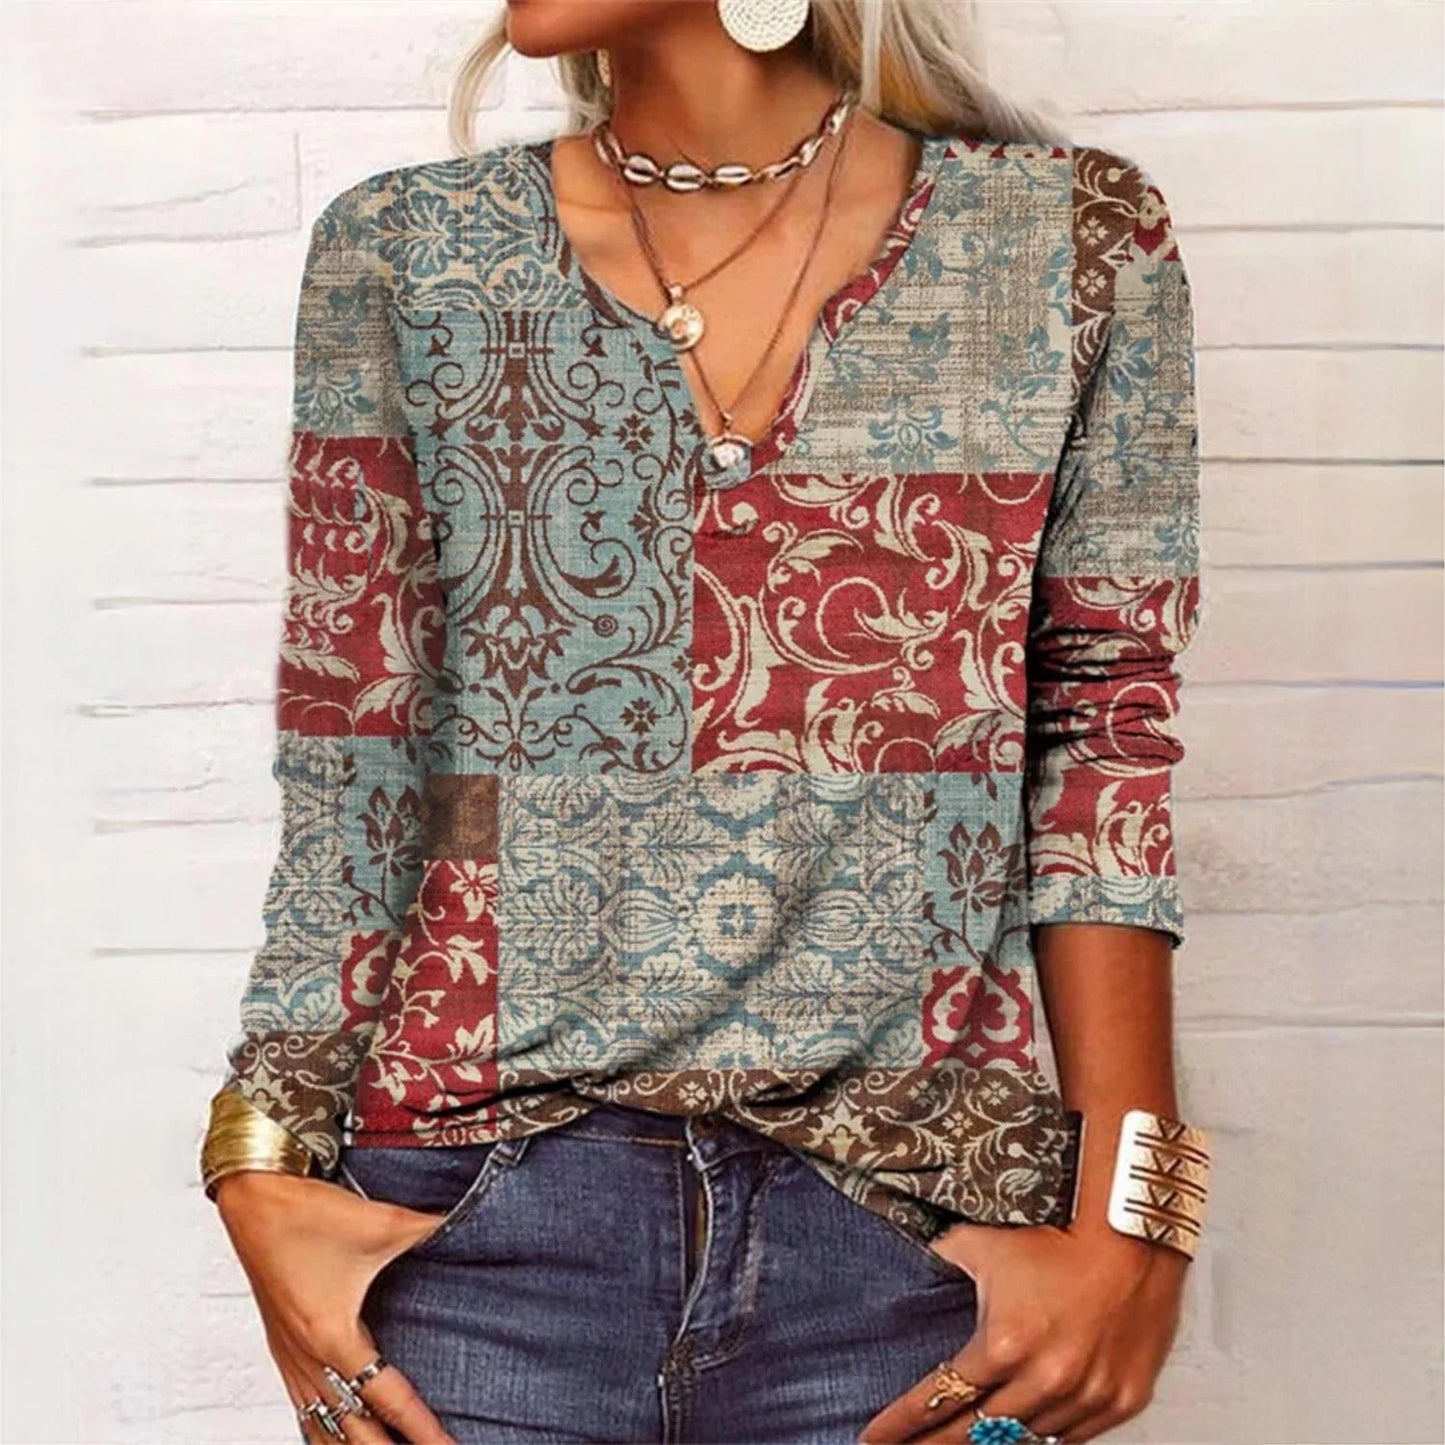 Lucia Comér® - Boho Blouse in Ethnic Style